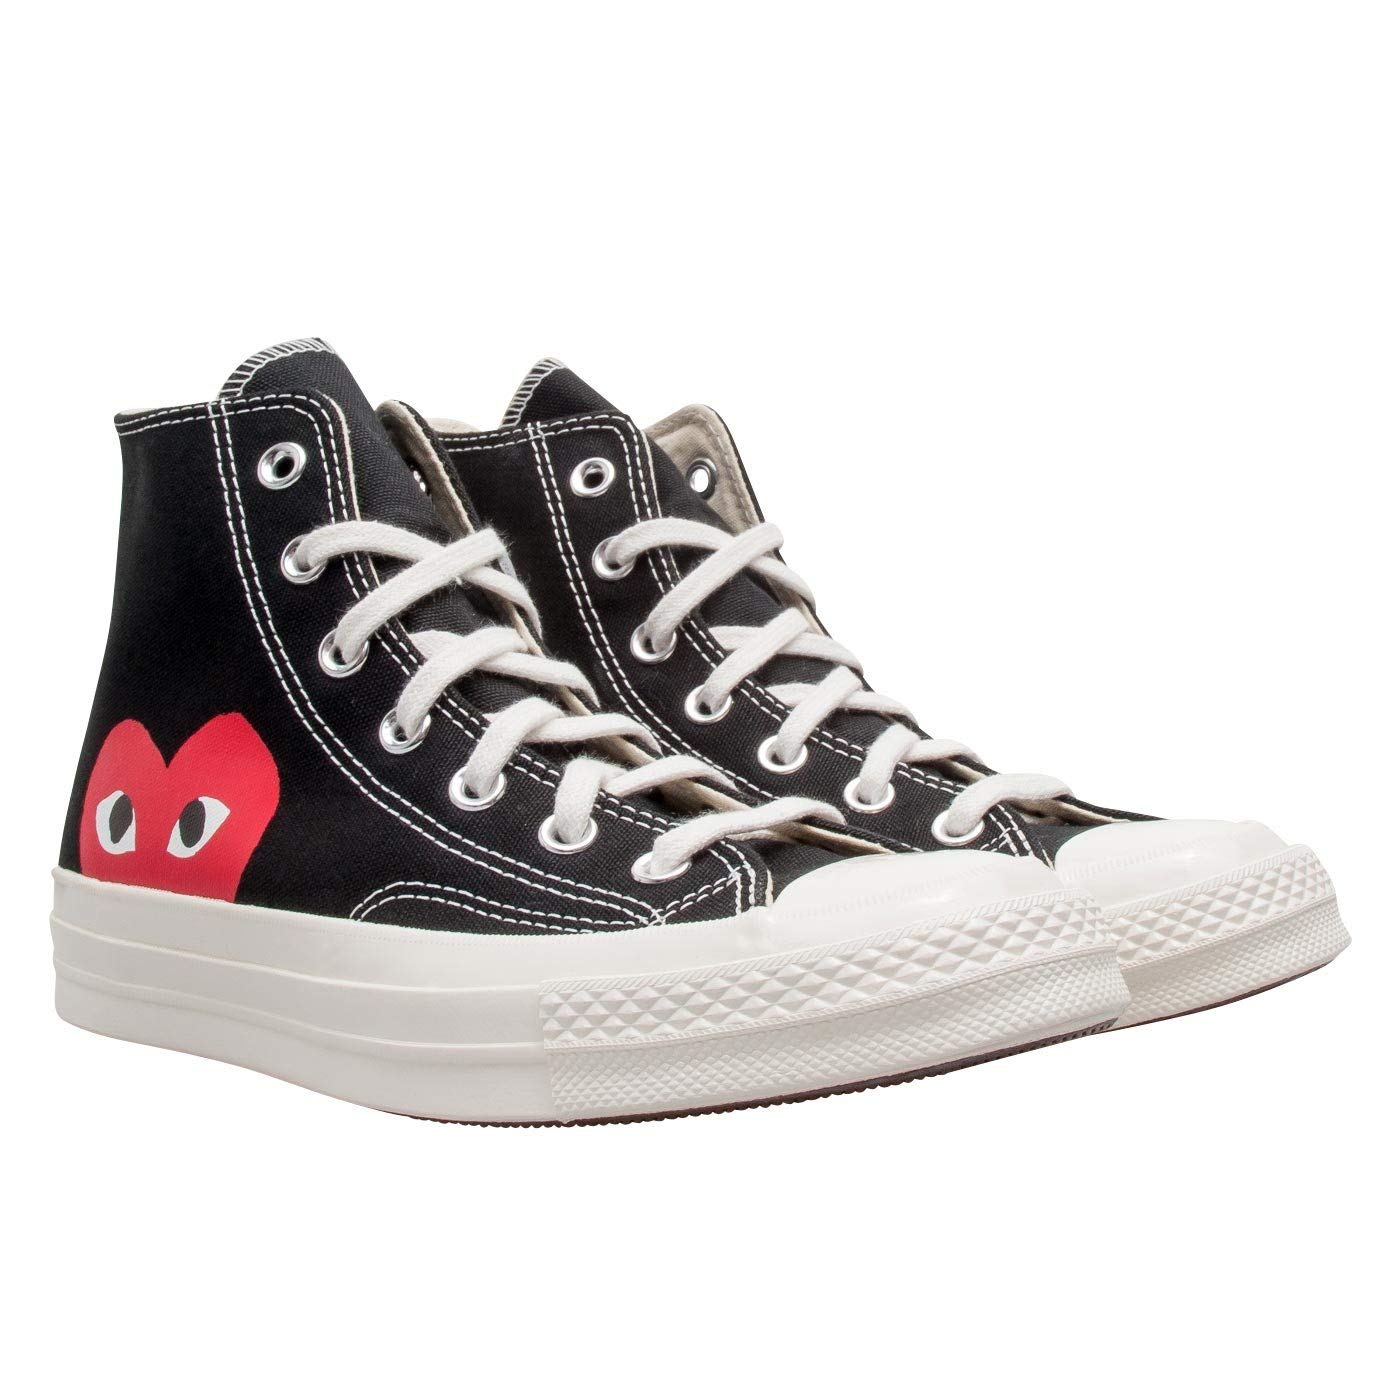 cdg converse meaning